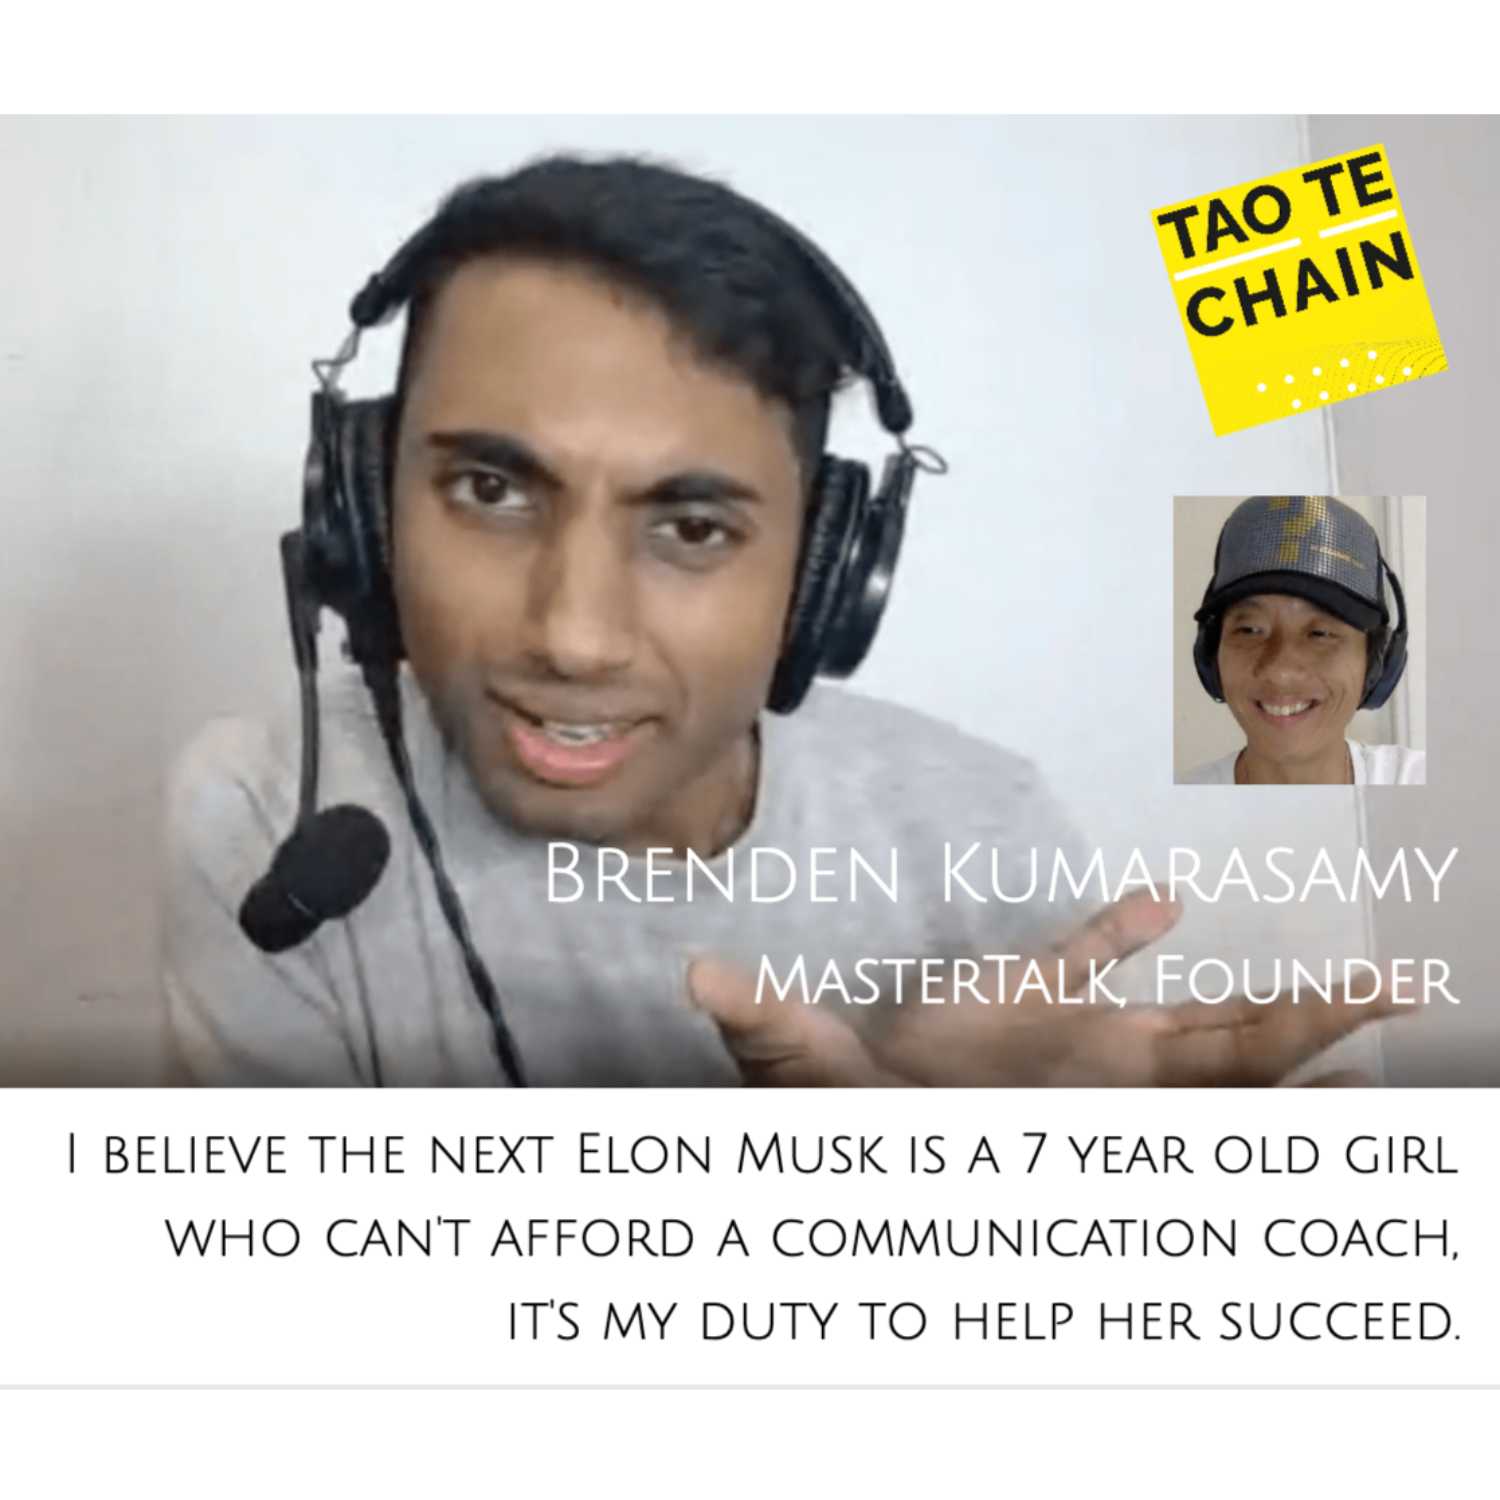 Brenden Kumarasamy - I believe the next Elon Musk is a 7 year old girl who can't afford a communication coach, it's my duty to help her succeed.